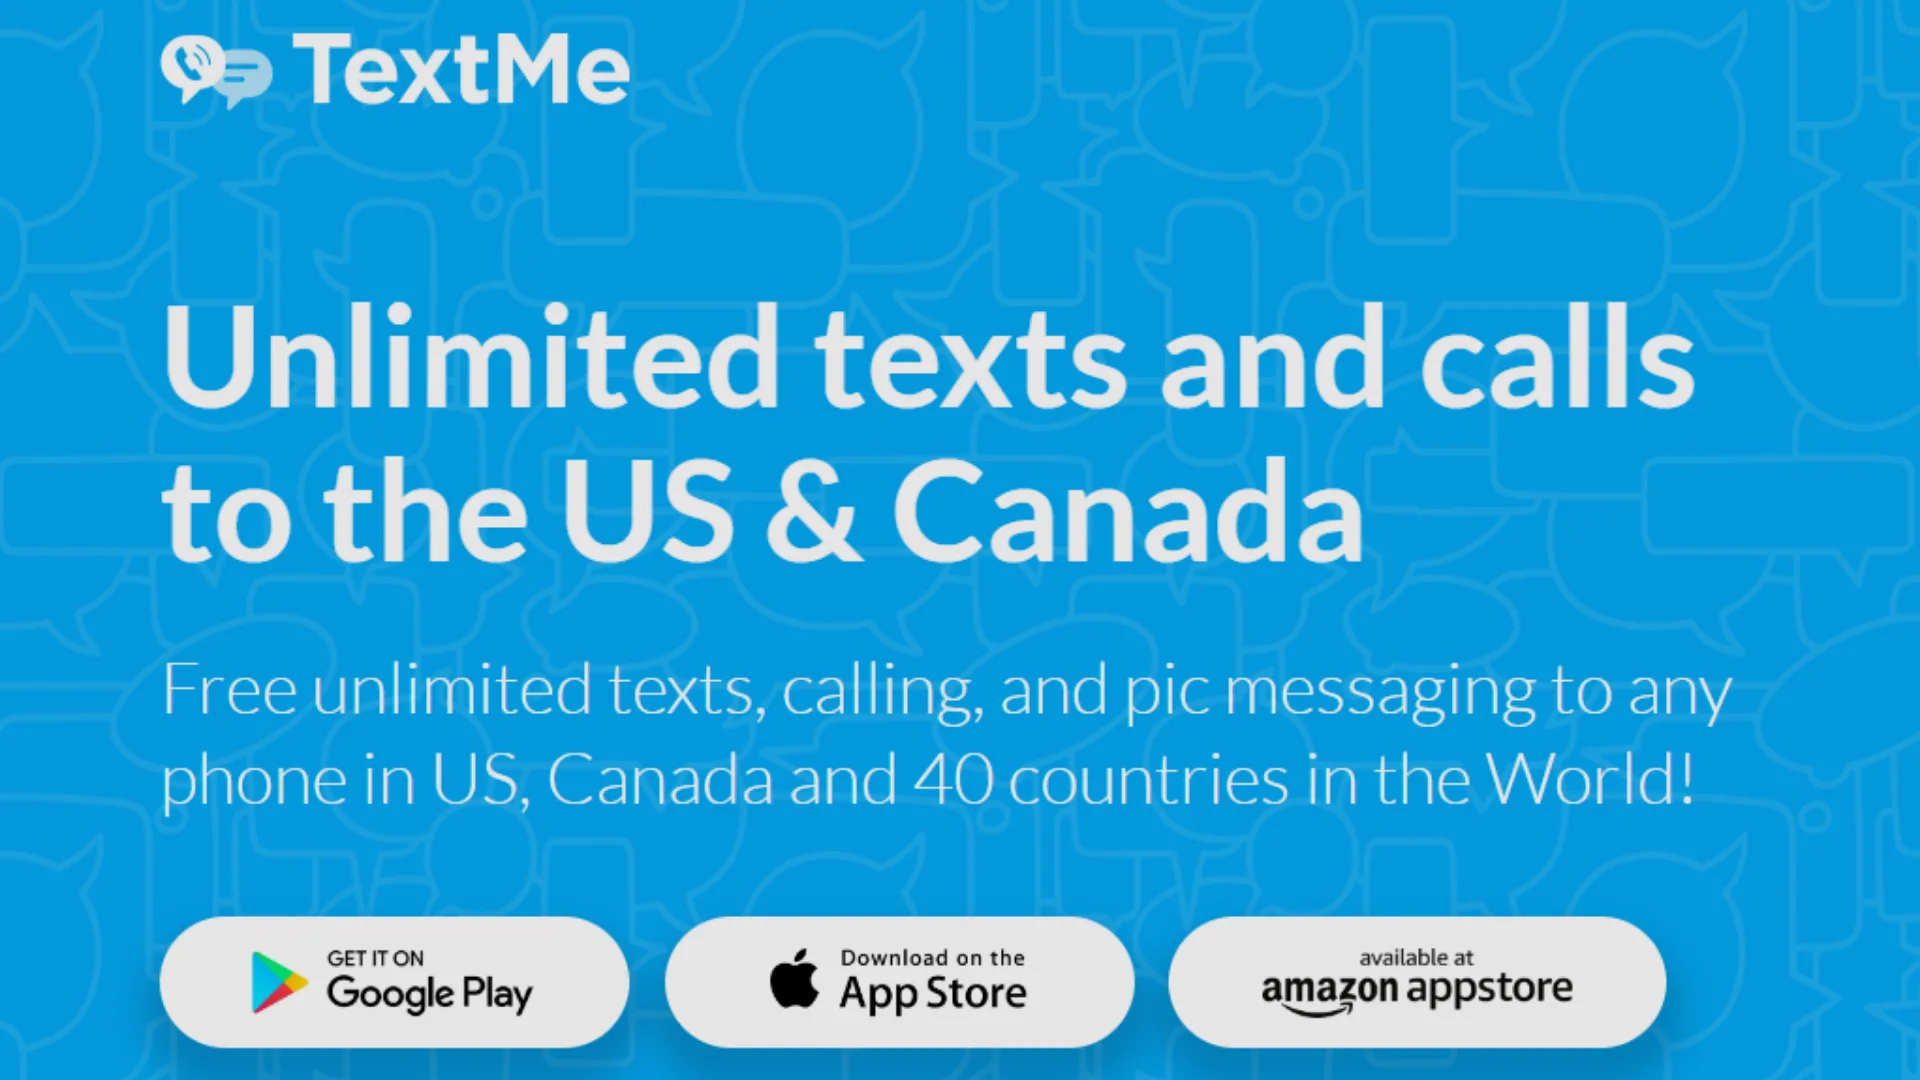 How can you text someone who has blocked you using TextMe?